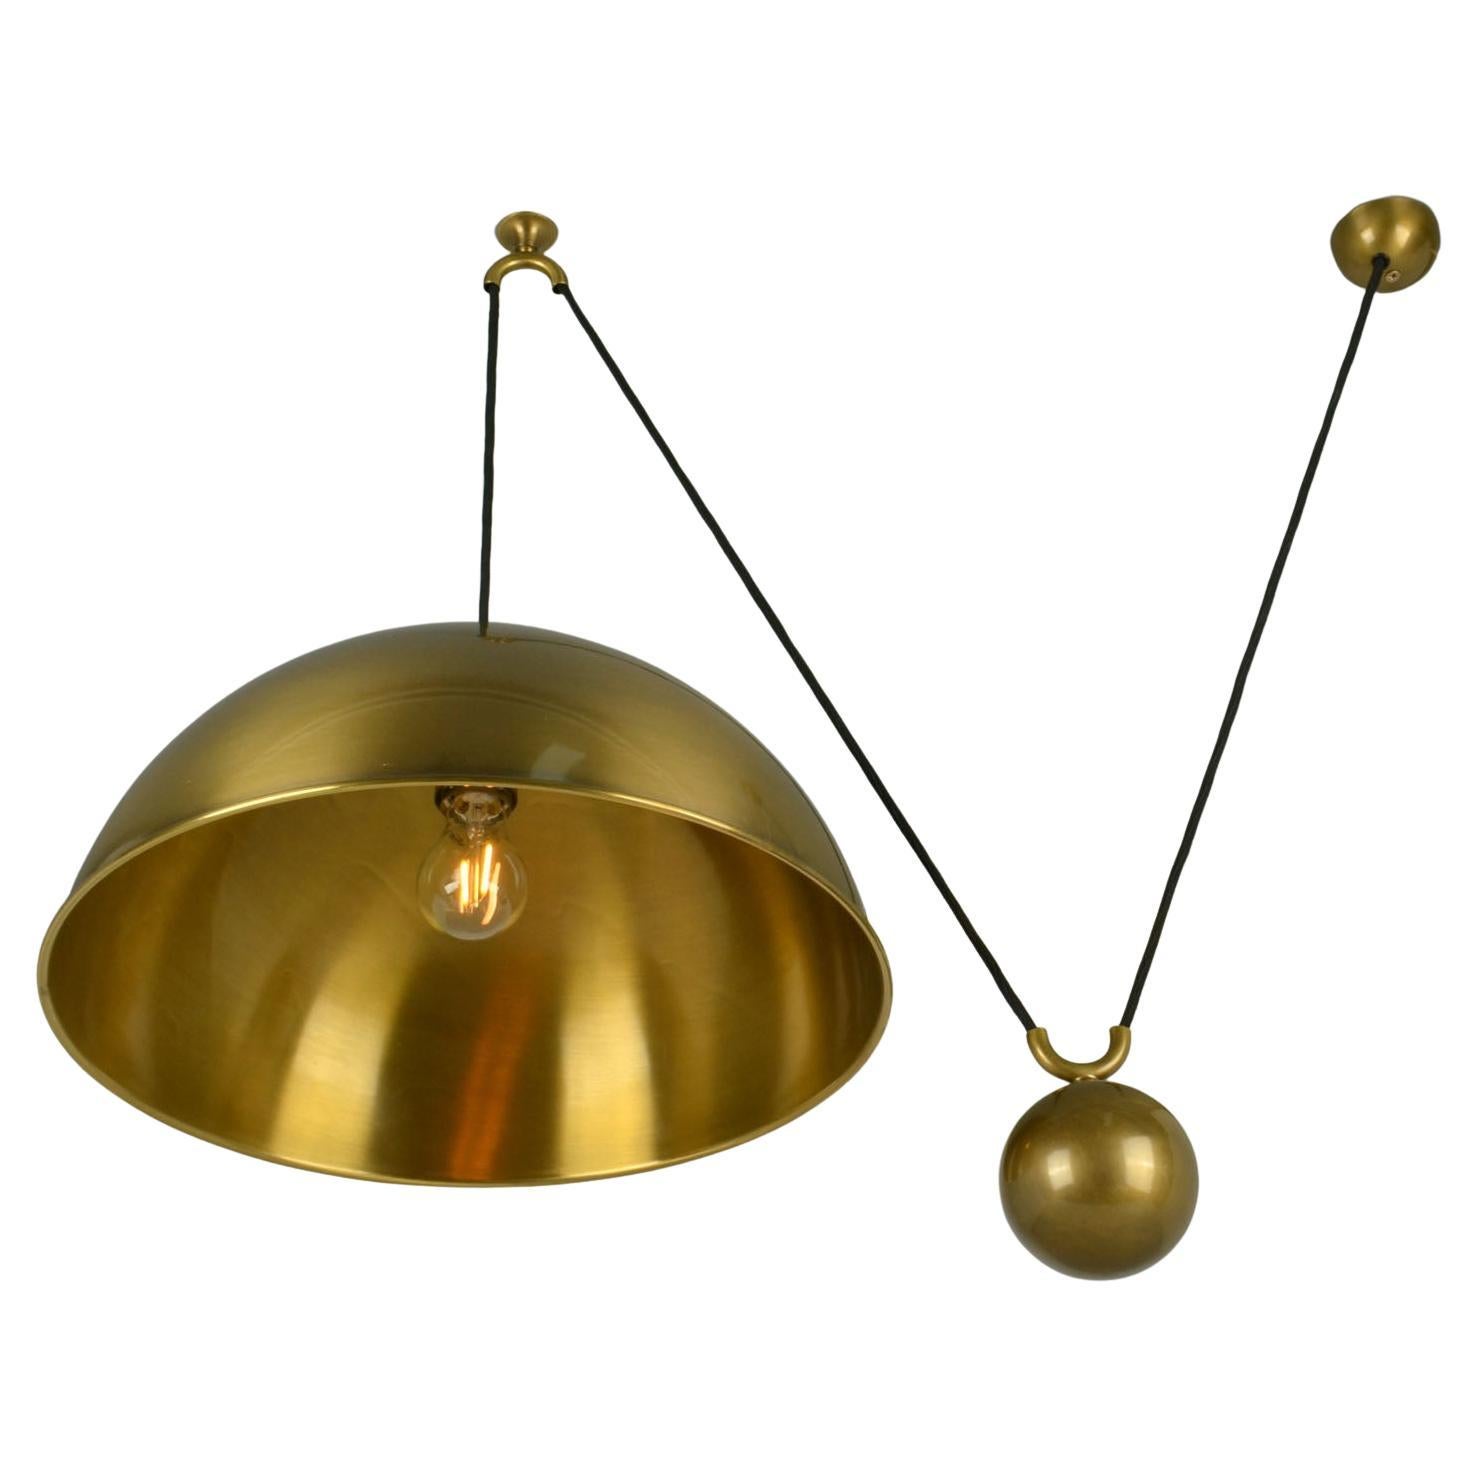 Original Counterbalance pendant 'Posa' by Florian Schulz with side weight. Strong and minimal pendant in a high quality spun and brushed brass moves smoothly up and down due to the solid brass counterweight. The brass is coated to protect from